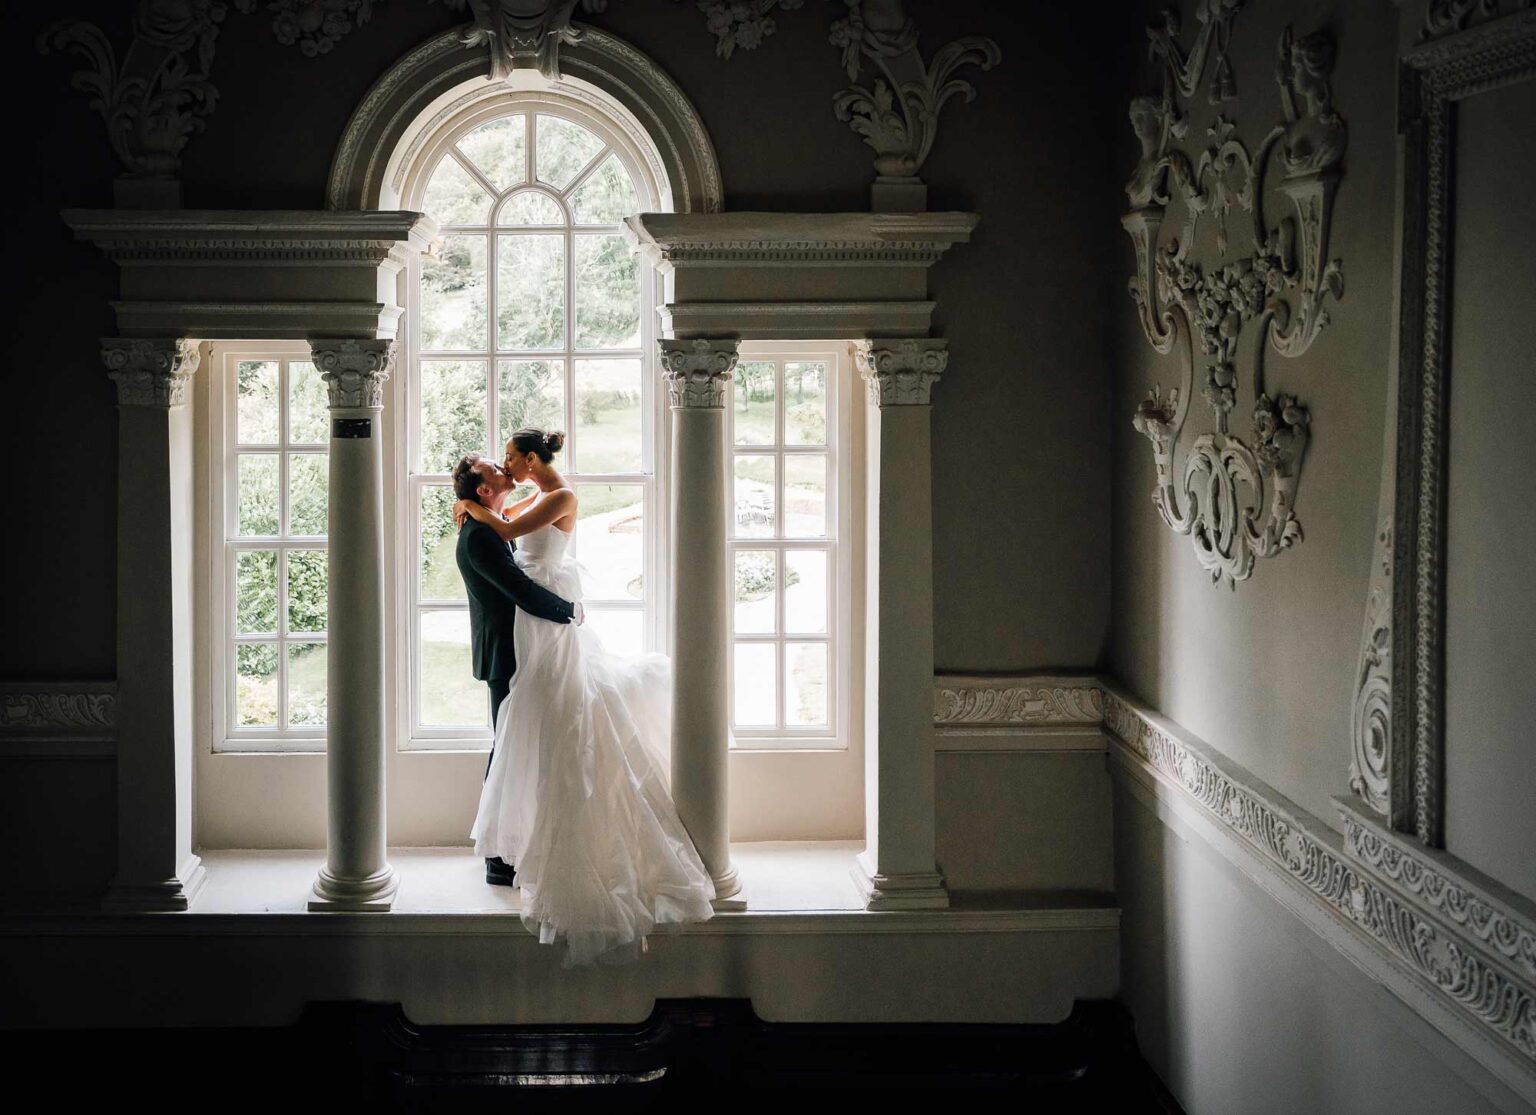 Kissing his wife, newlyweds embrace in wedding venue lovers window